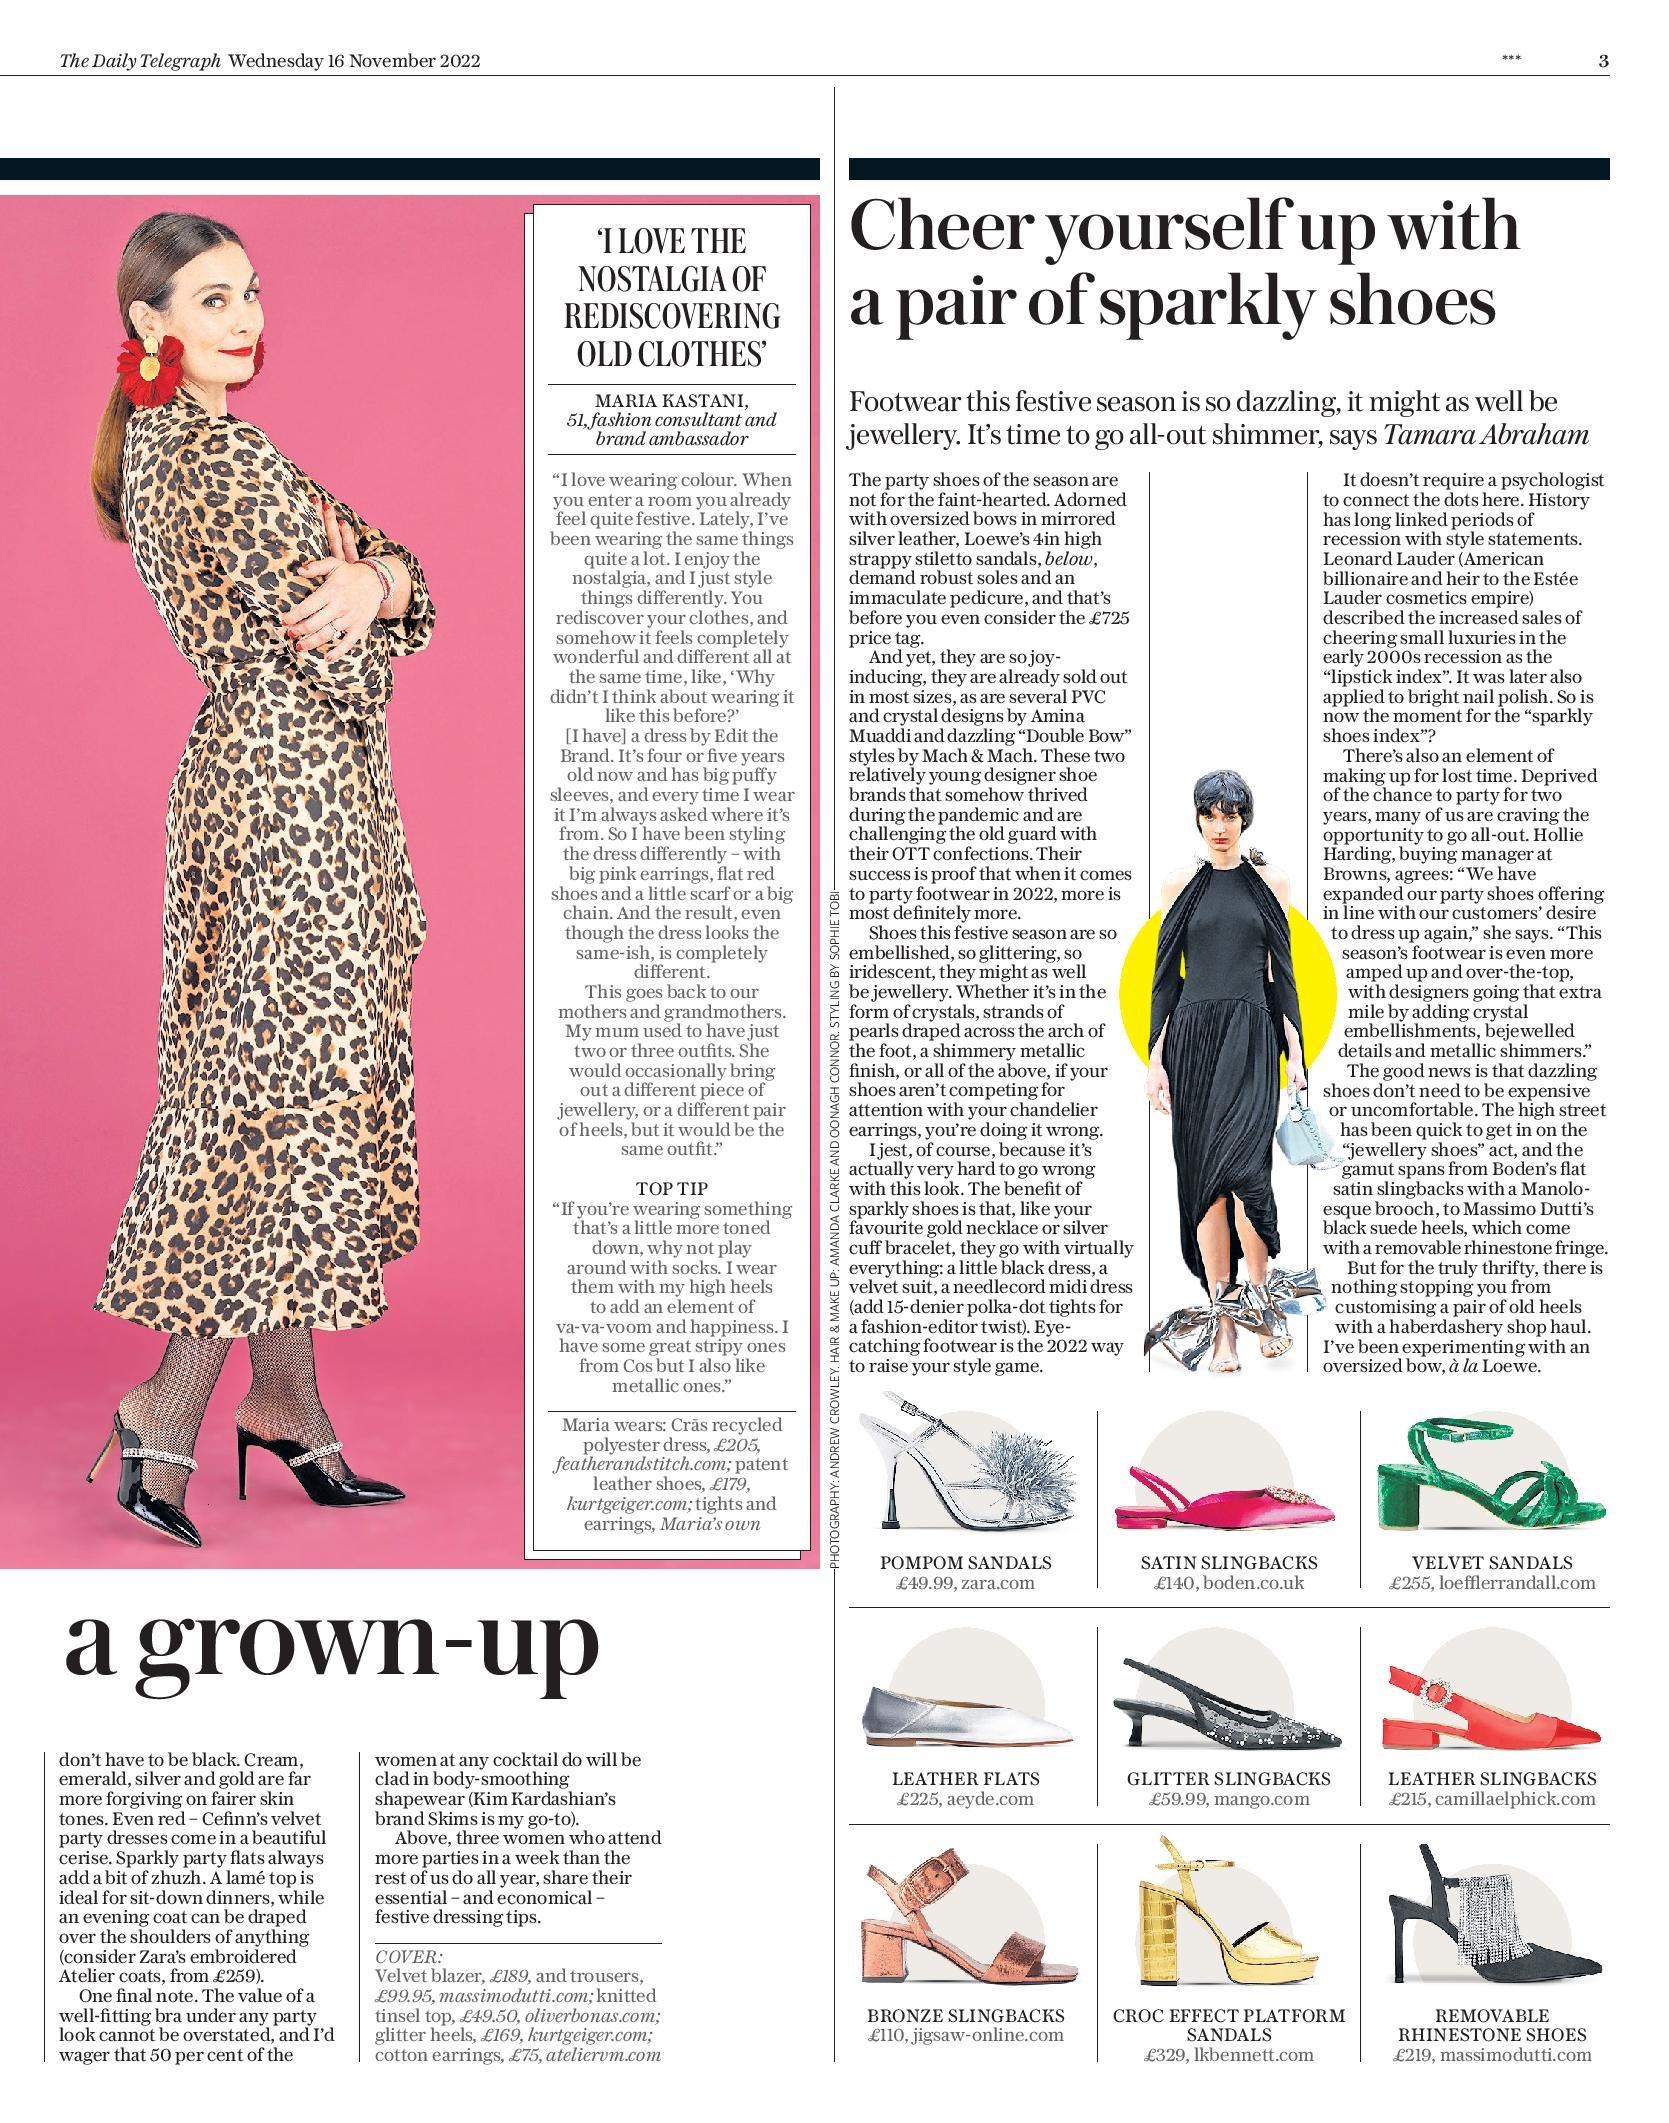 Daily Telegraph_16-11-2022_Features_1st_p3-page-001.jpg